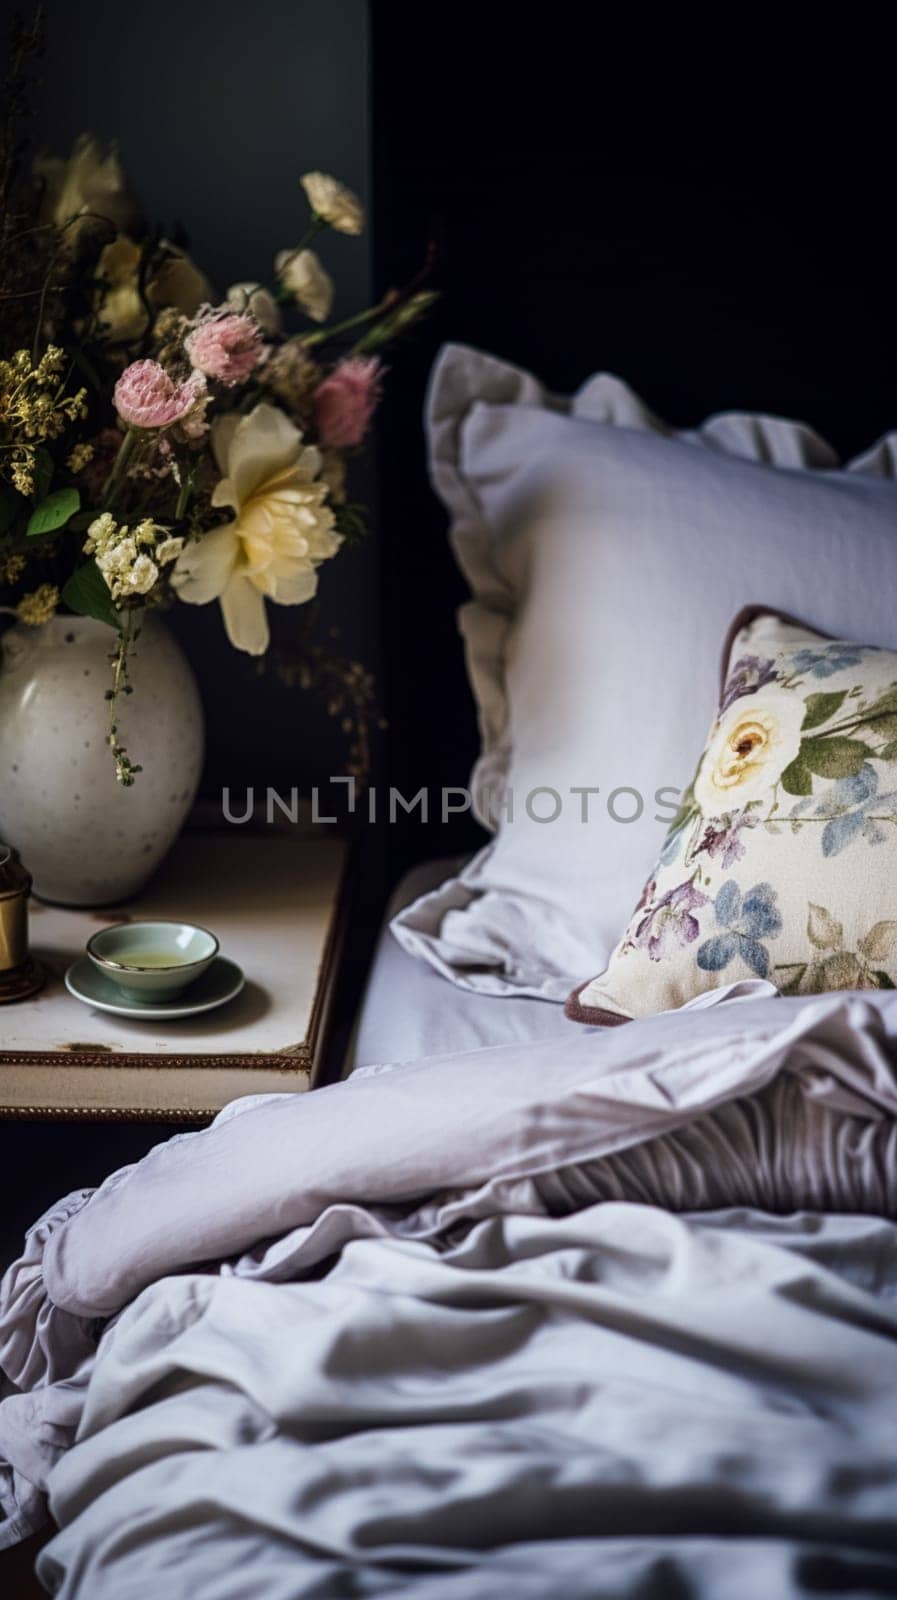 Bedroom decor, modern cottage interior design and home decor, bed linen and elegant country bedding, lamp and flowers, English countryside house style inspiration